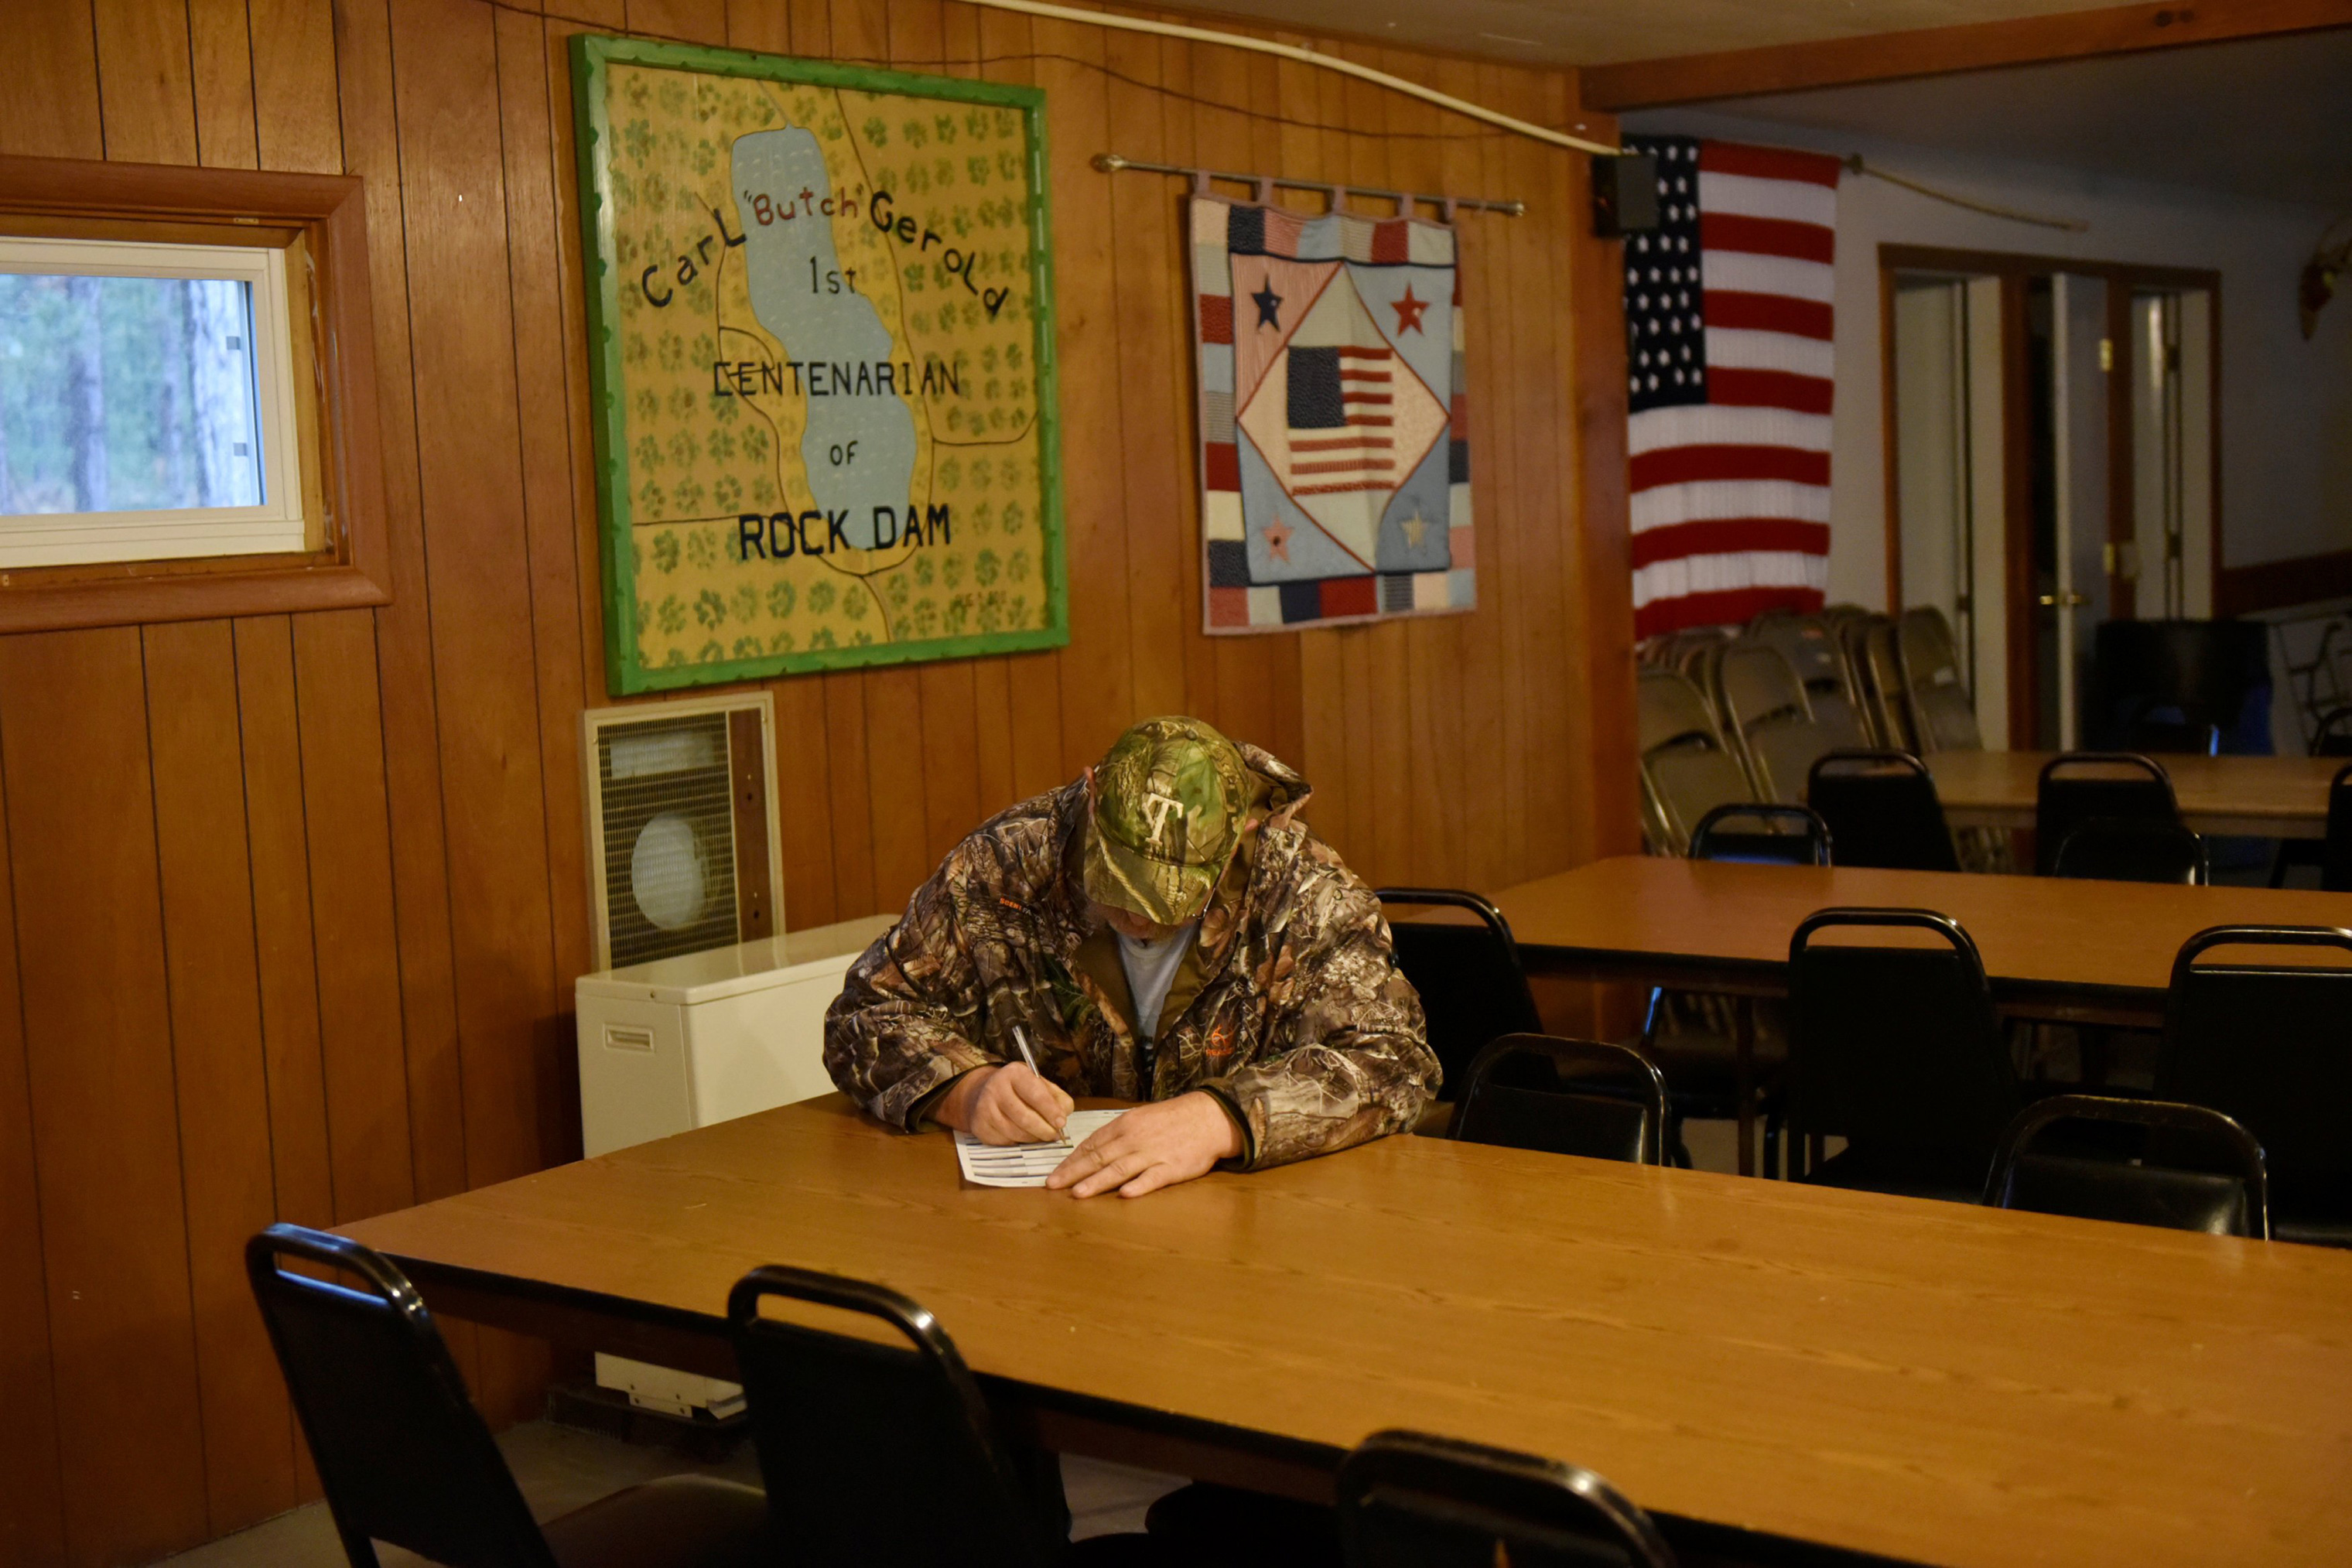 Ivan Ruzic fills out his ballot for the midterm election at the Rock Dam Rod and Gun Club in Foster Township, Wis. (Nick Oxford—Reuters)